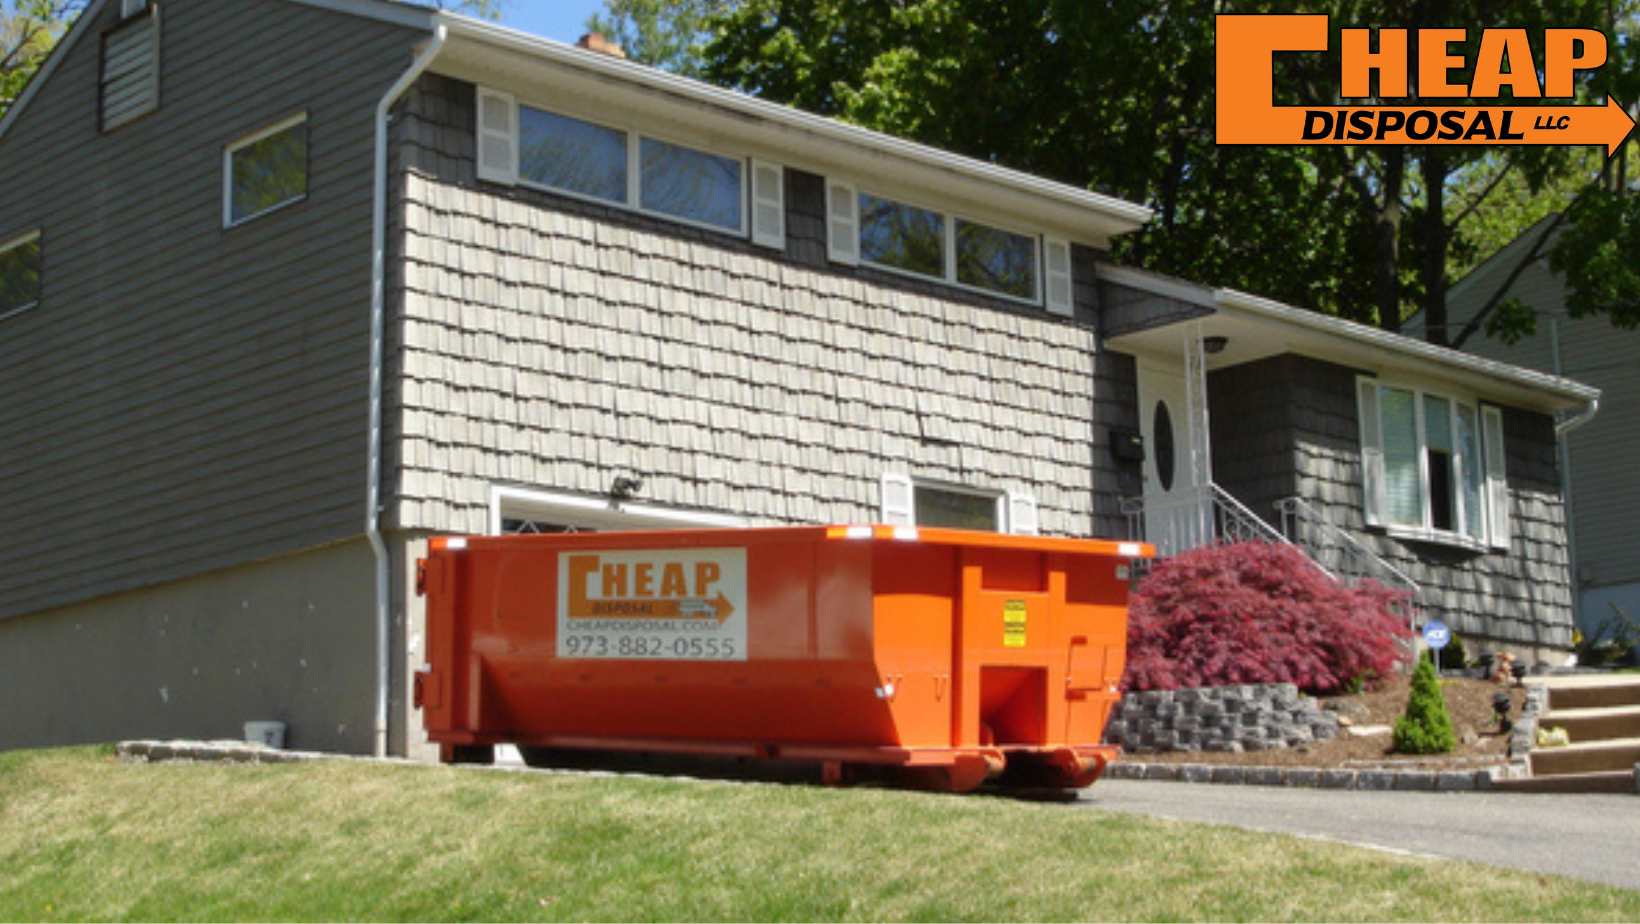 Make Any Occasion a Success with Cheap Disposal’s Dumpster and Portable Toilet Rentals